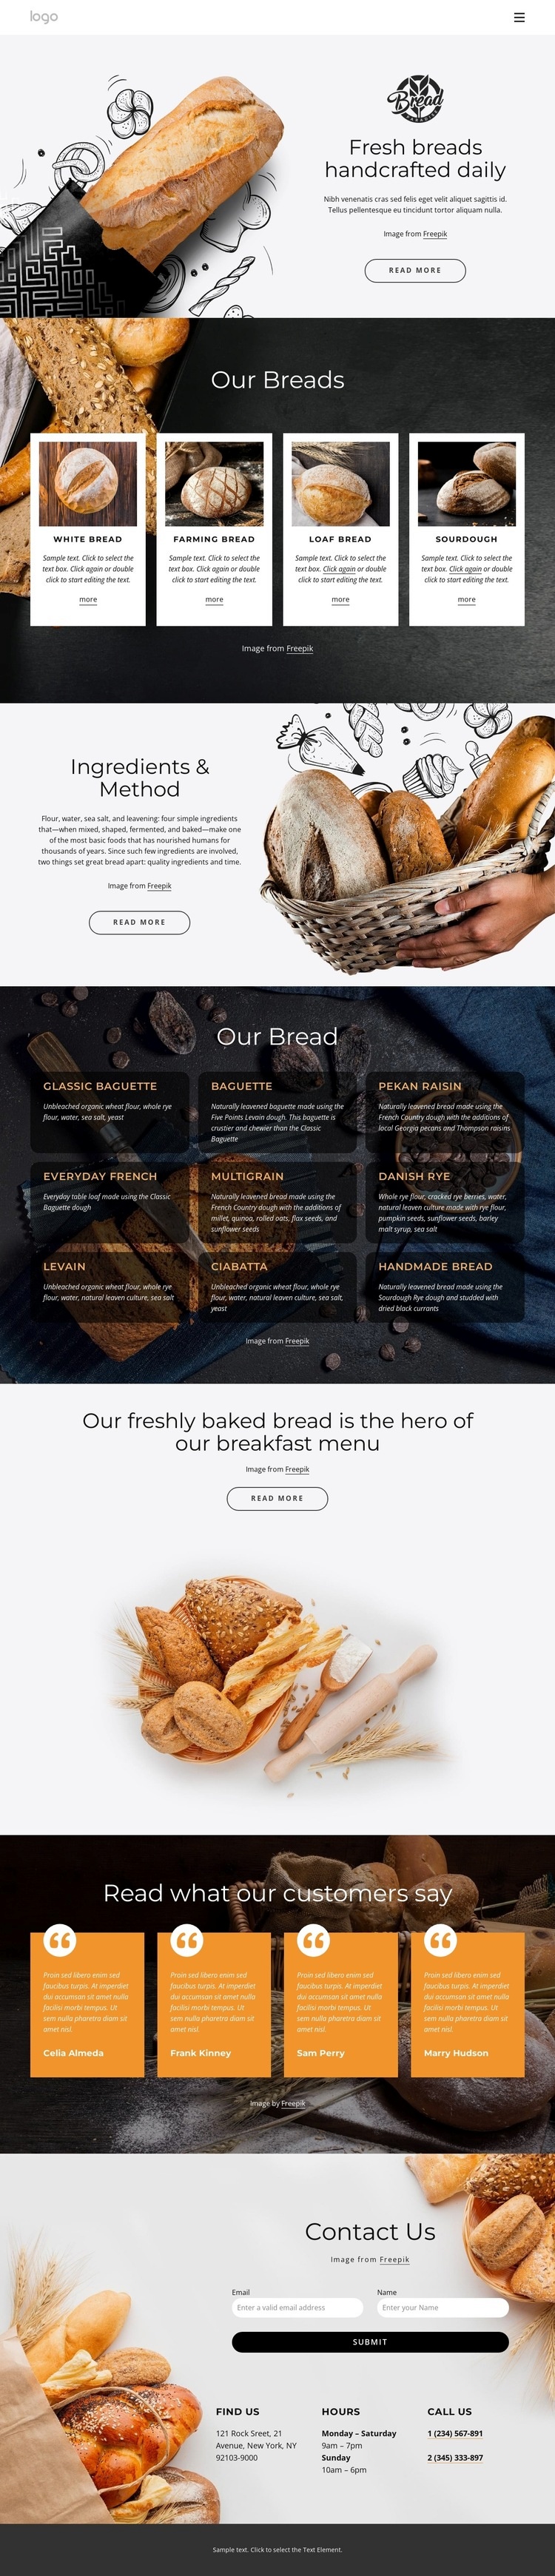 Fresh bread handcrafted every day Wix Template Alternative